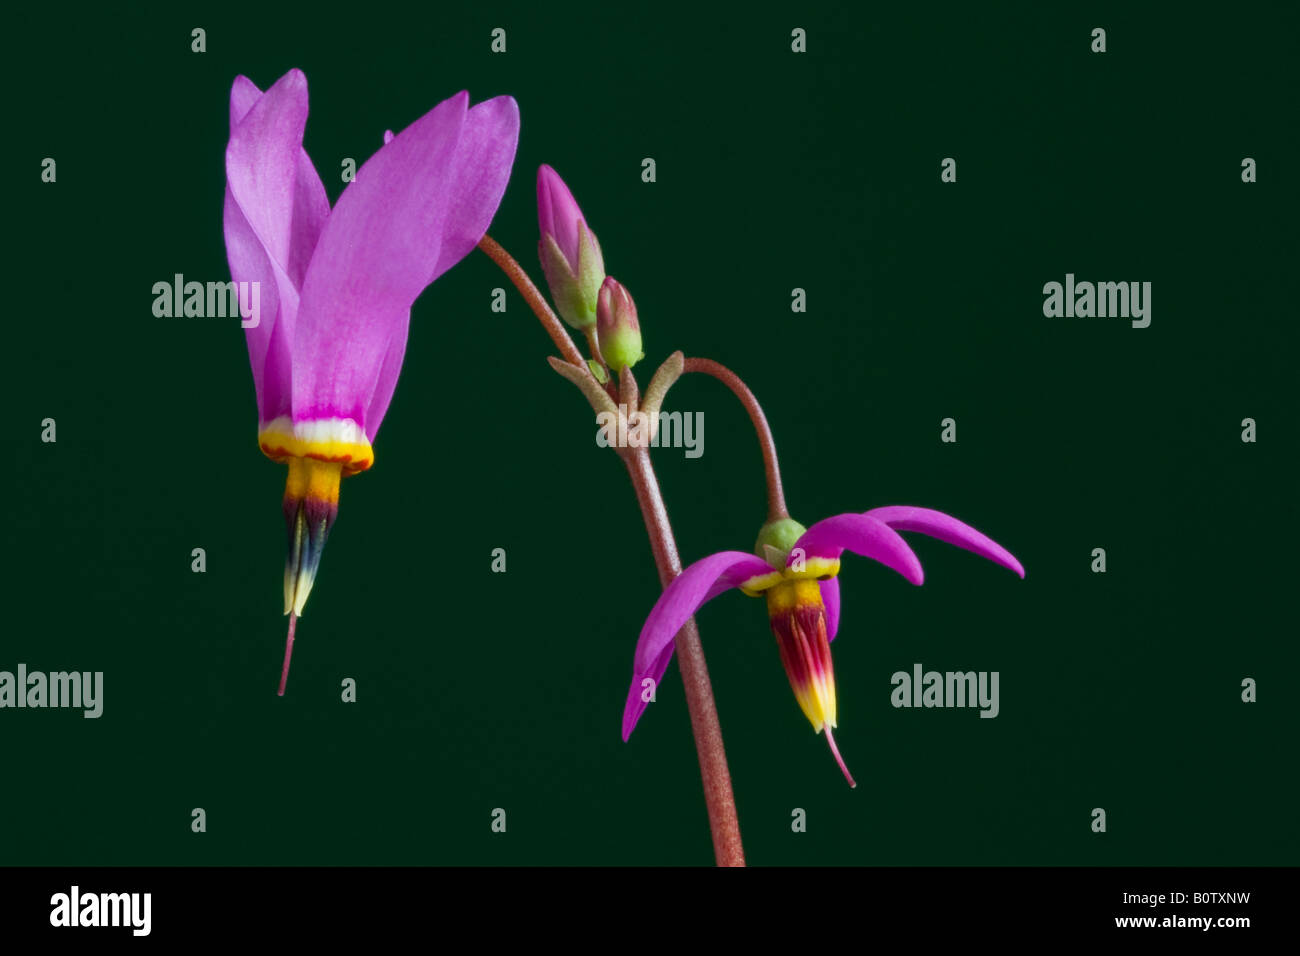 studio image of dodecatheon red wings Stock Photo